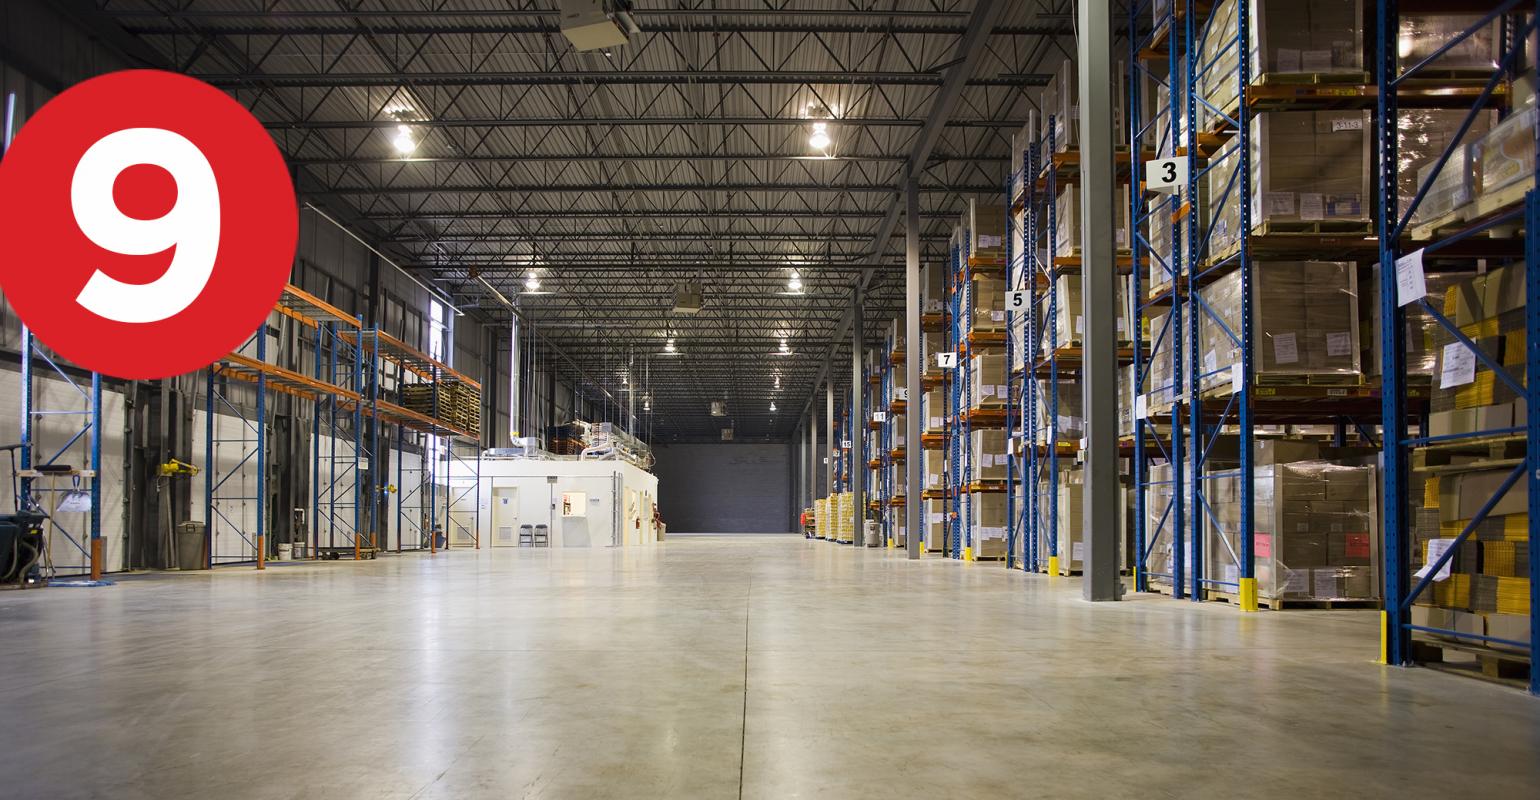 Aims to Sublet, End Warehouse Leases as Online Sales Cool - Bloomberg